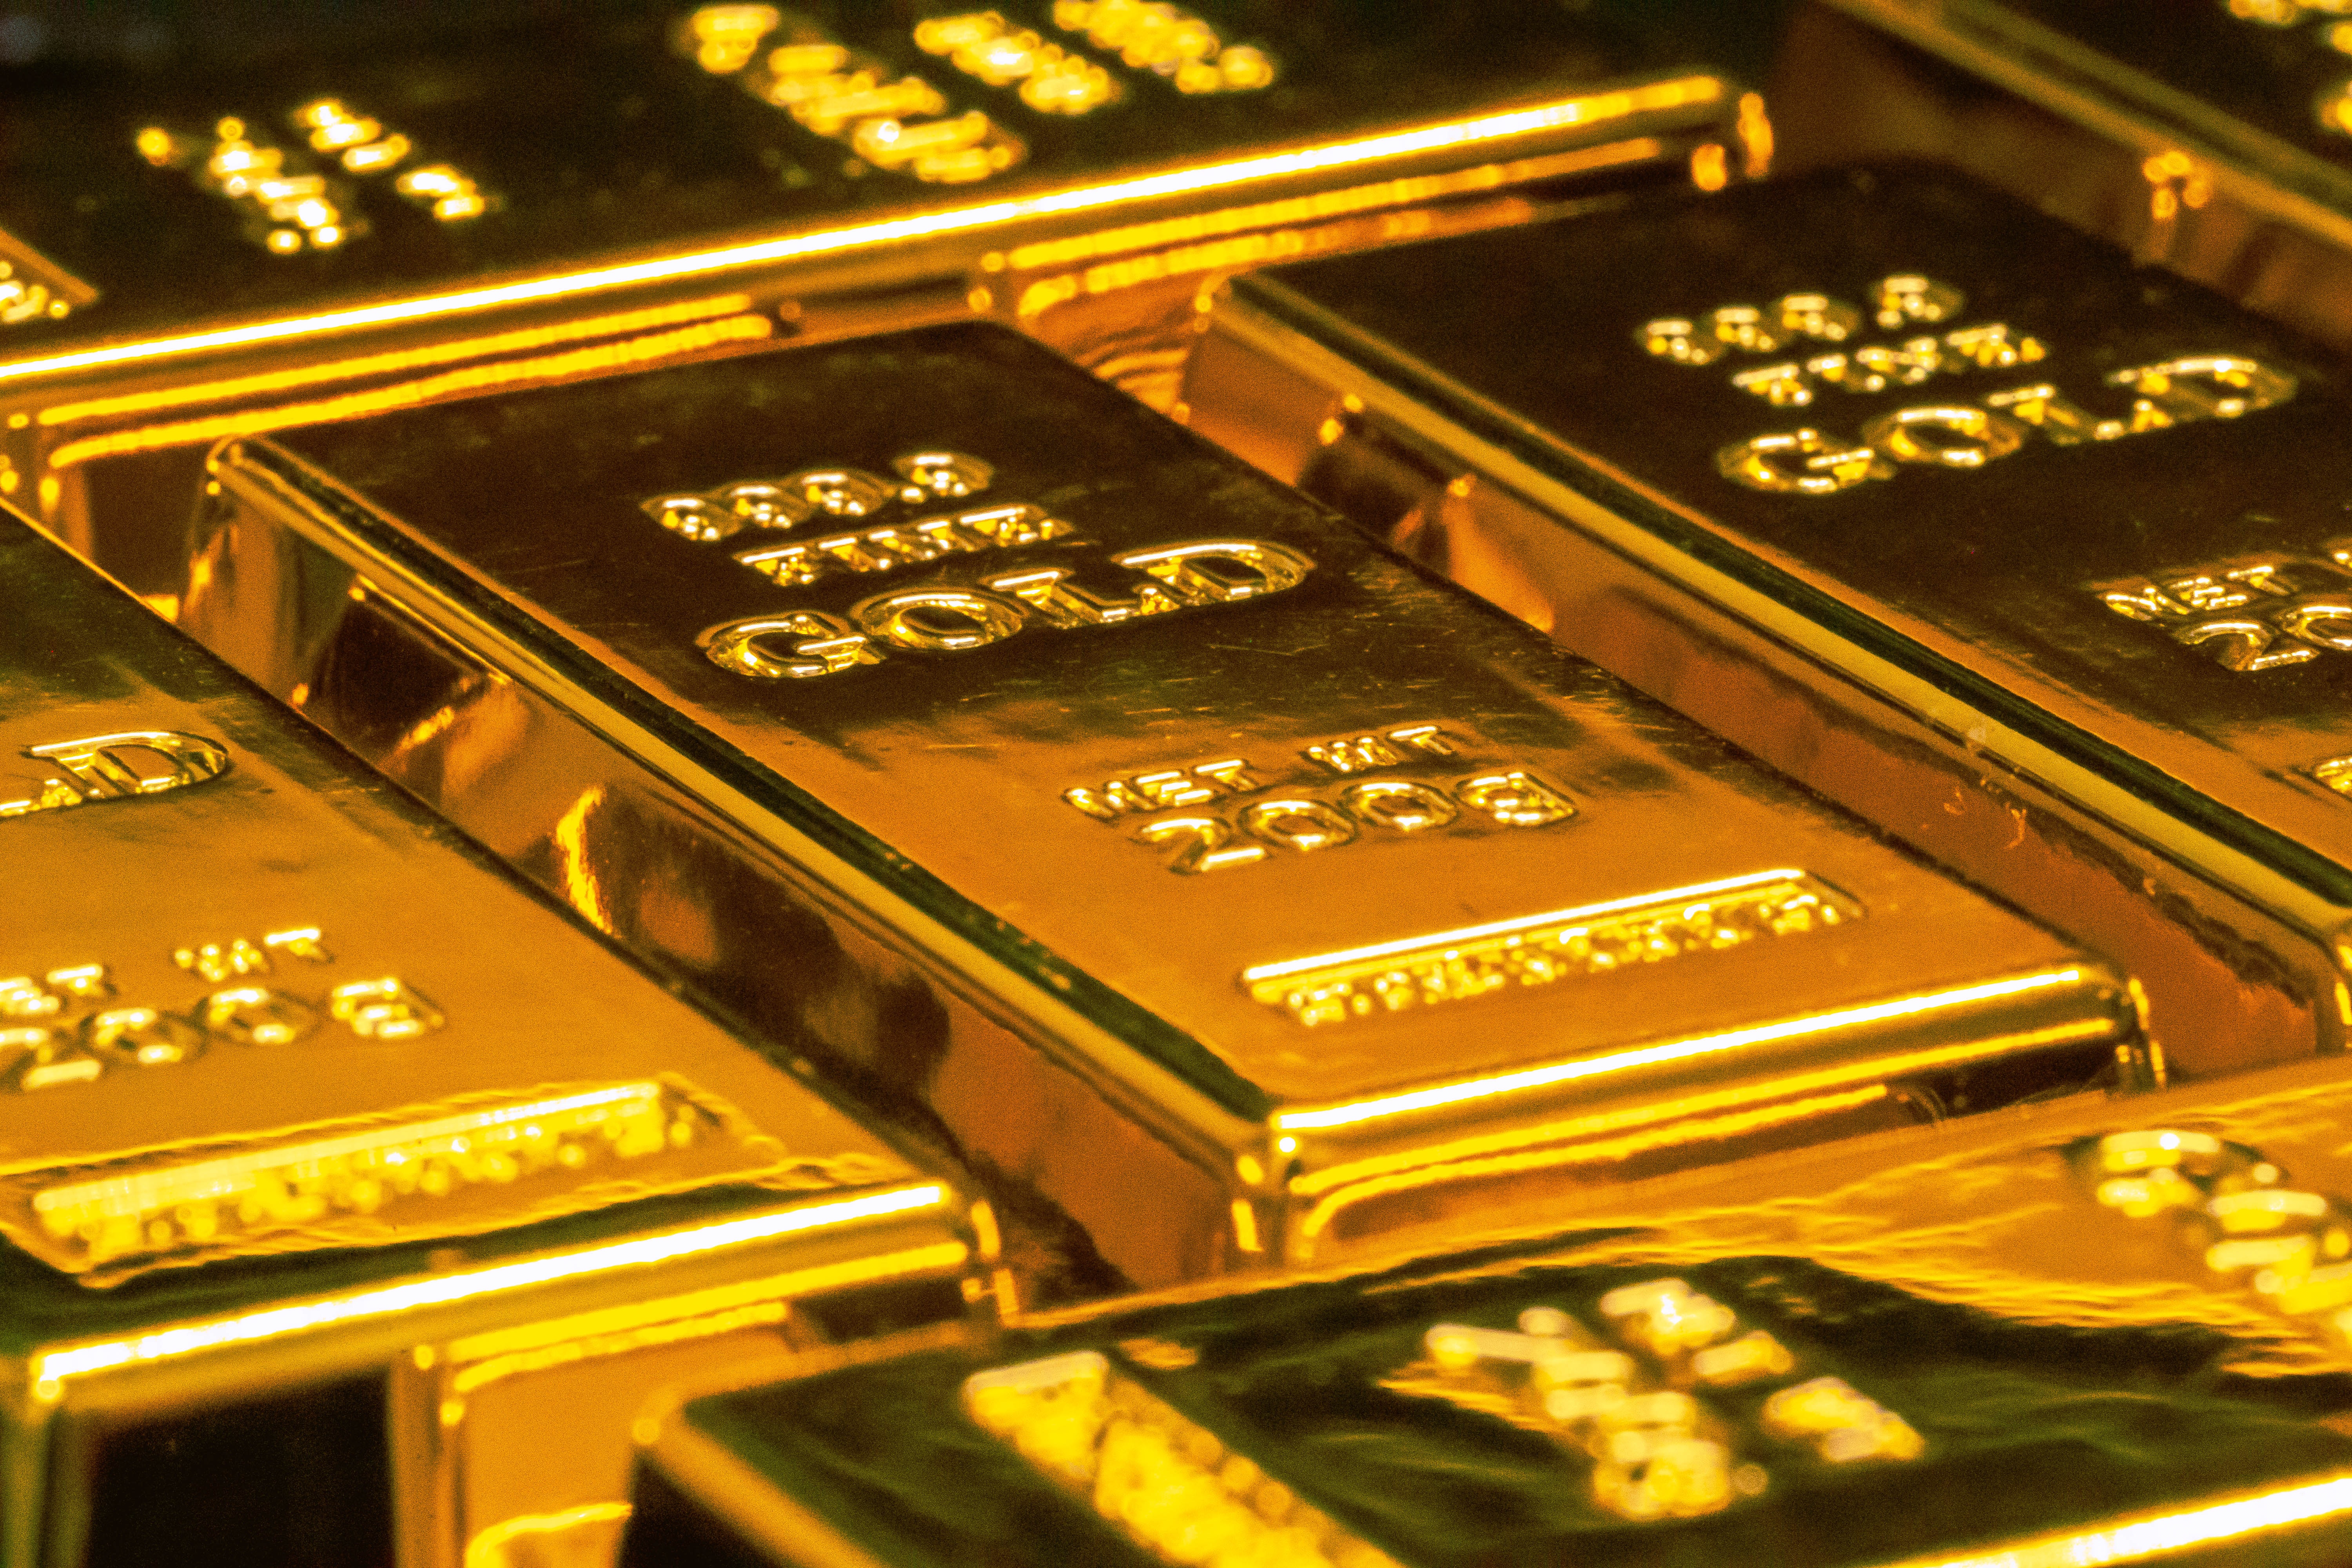 Legal gold imports on the decline